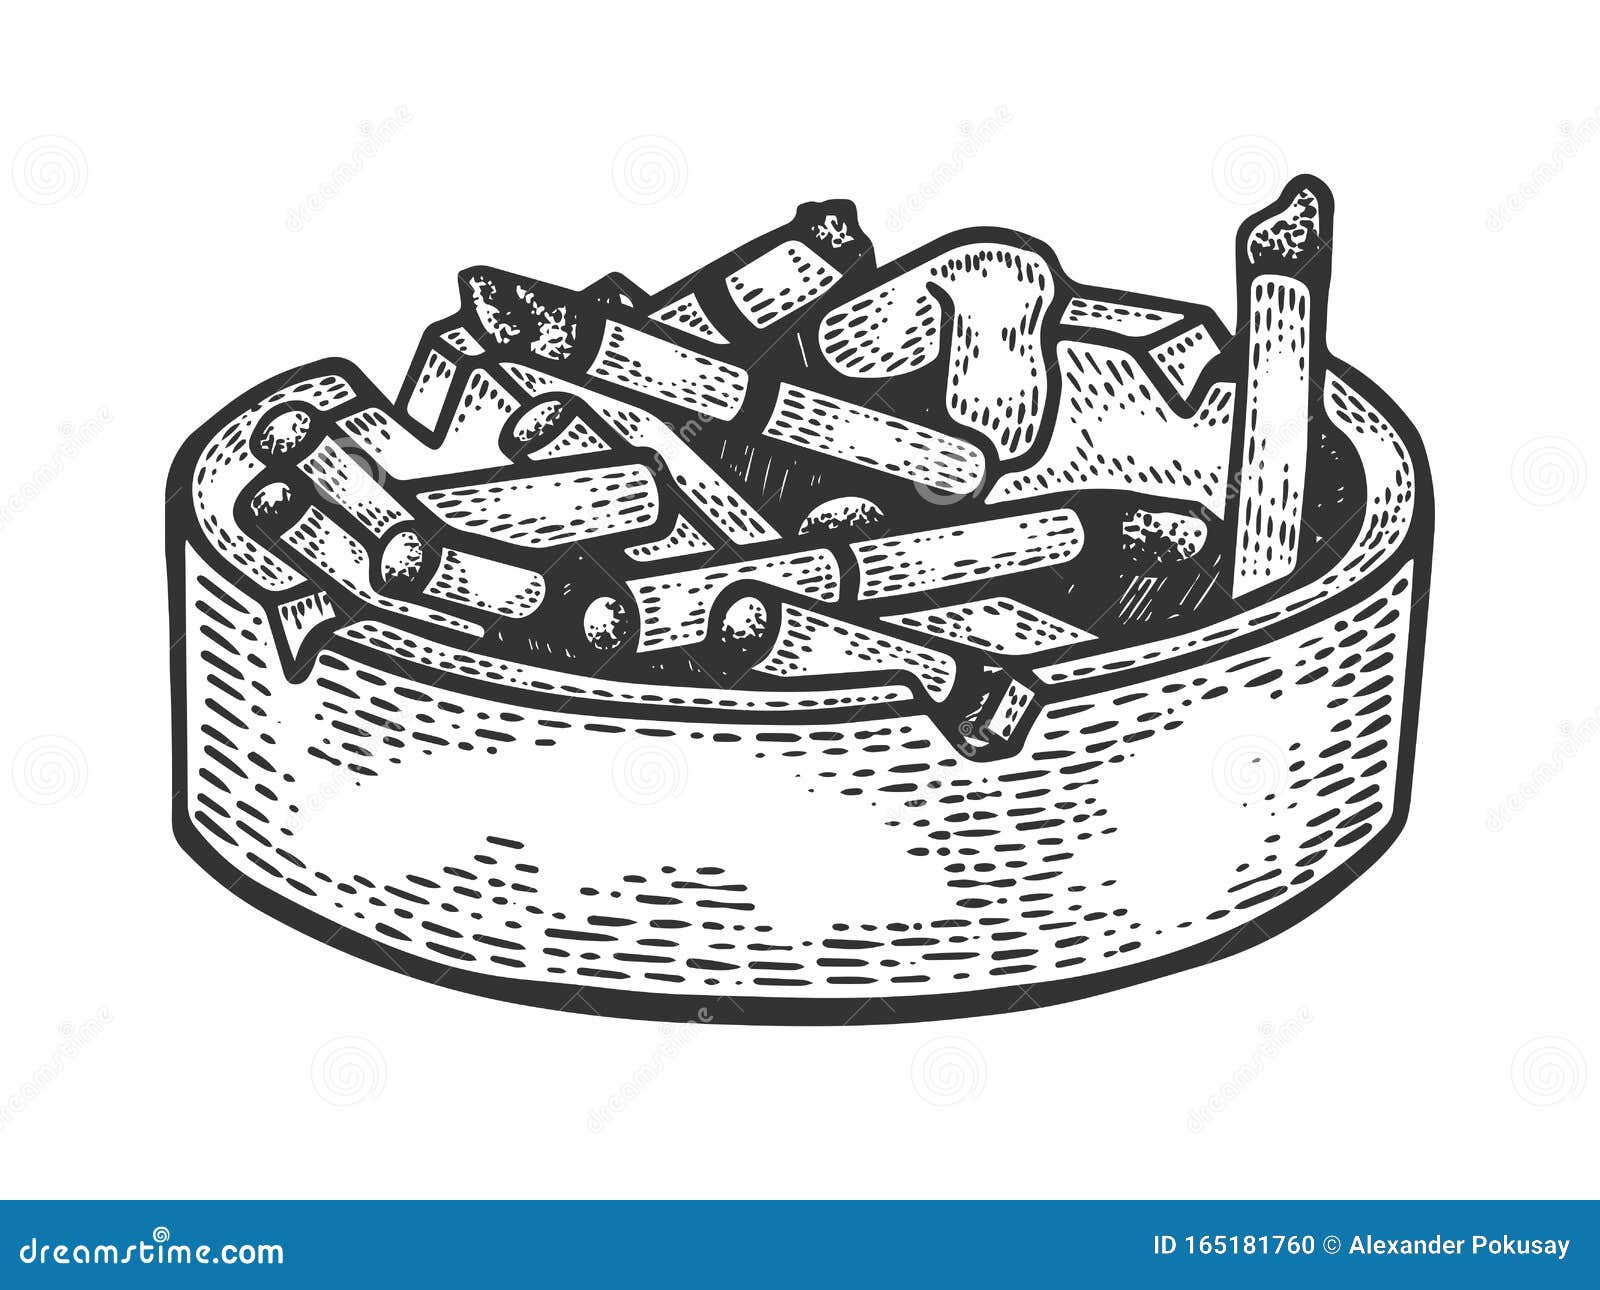 Ashtray Doodle Vector Illustration | CartoonDealer.com #60514488 How To Draw A Pack Of Cigarettes